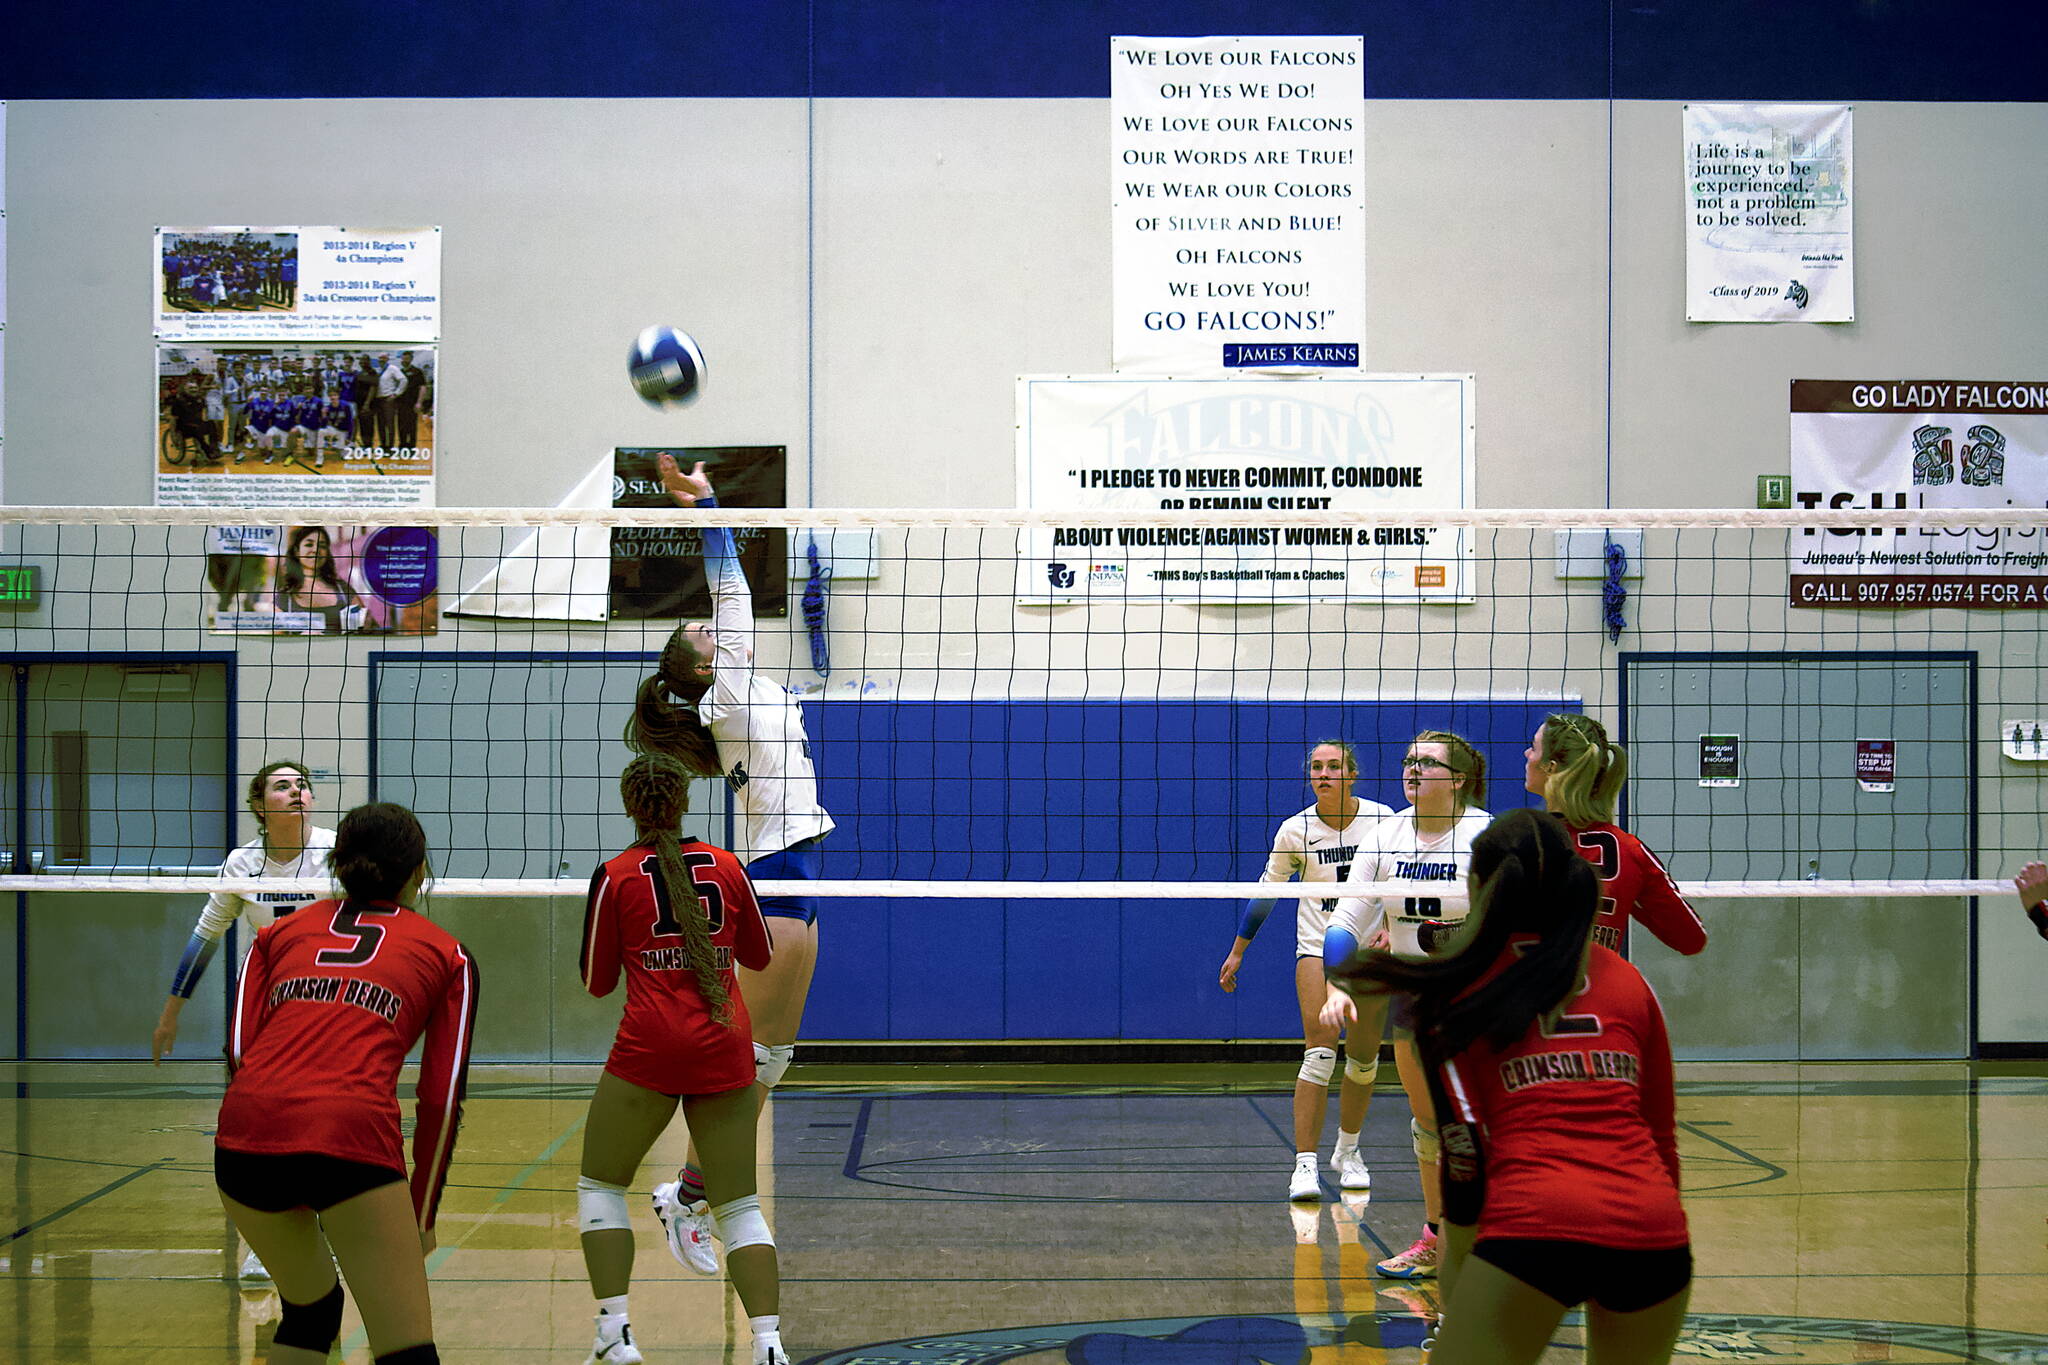 Juneau’s two high school volleyball teams, Thunder Mountain High School and Juneau-Douglas High School: Yadaa.at Kalé, face off last Saturday at TMHS as they go through polar opposite seasons this year. (Mark Sabbatini / Juneau Empire)